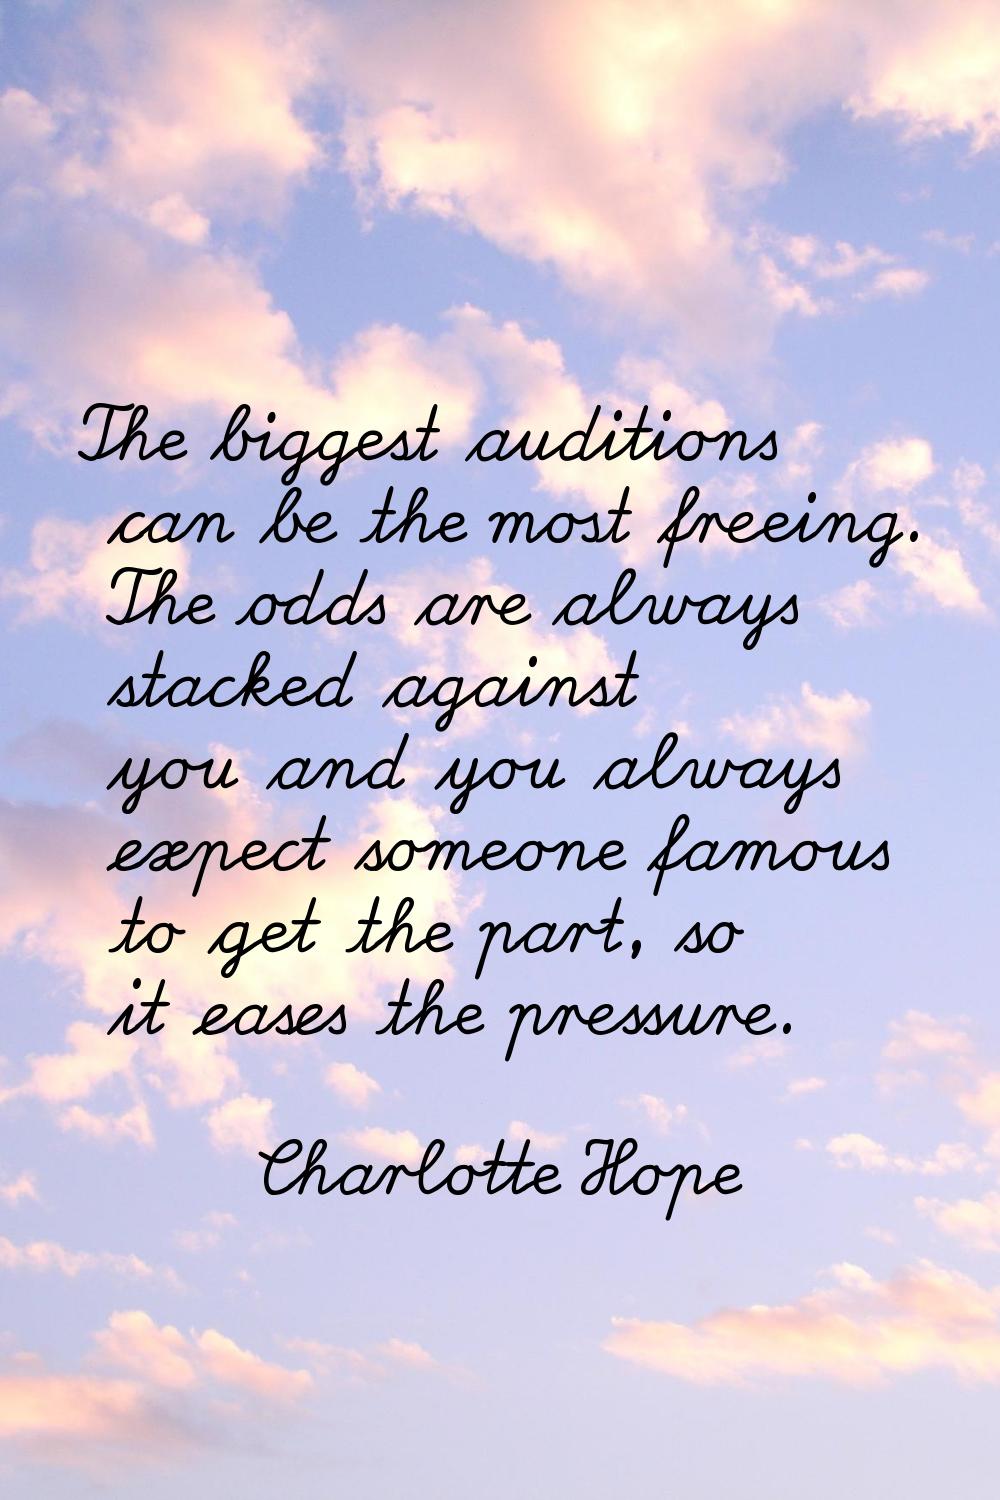 The biggest auditions can be the most freeing. The odds are always stacked against you and you alwa